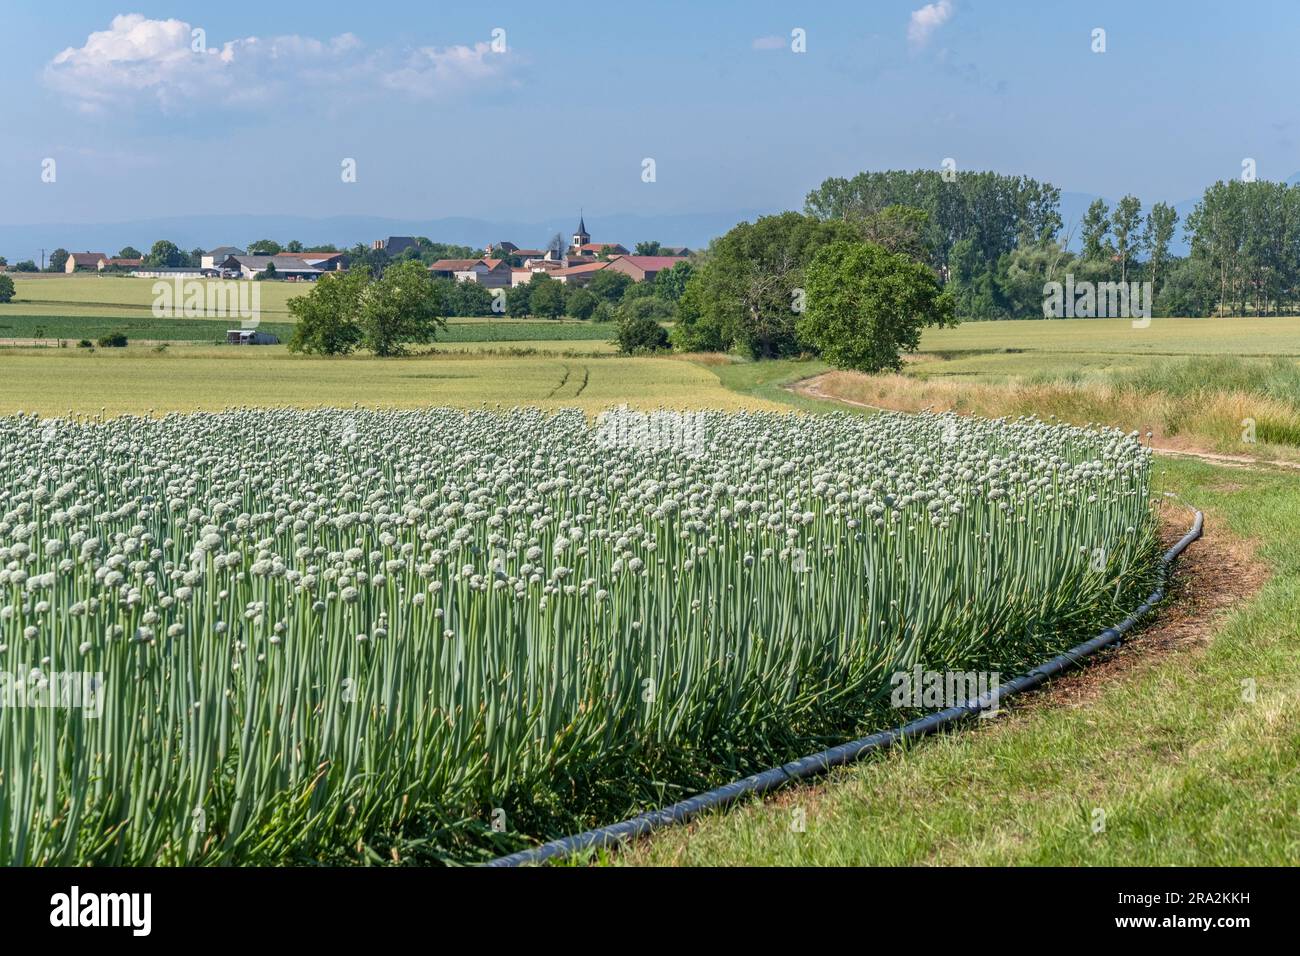 France, Puy de Dome, Chappes, growing onions for seed production, plain of Limagne, near Riom, Chaine des Puys in the background Stock Photo